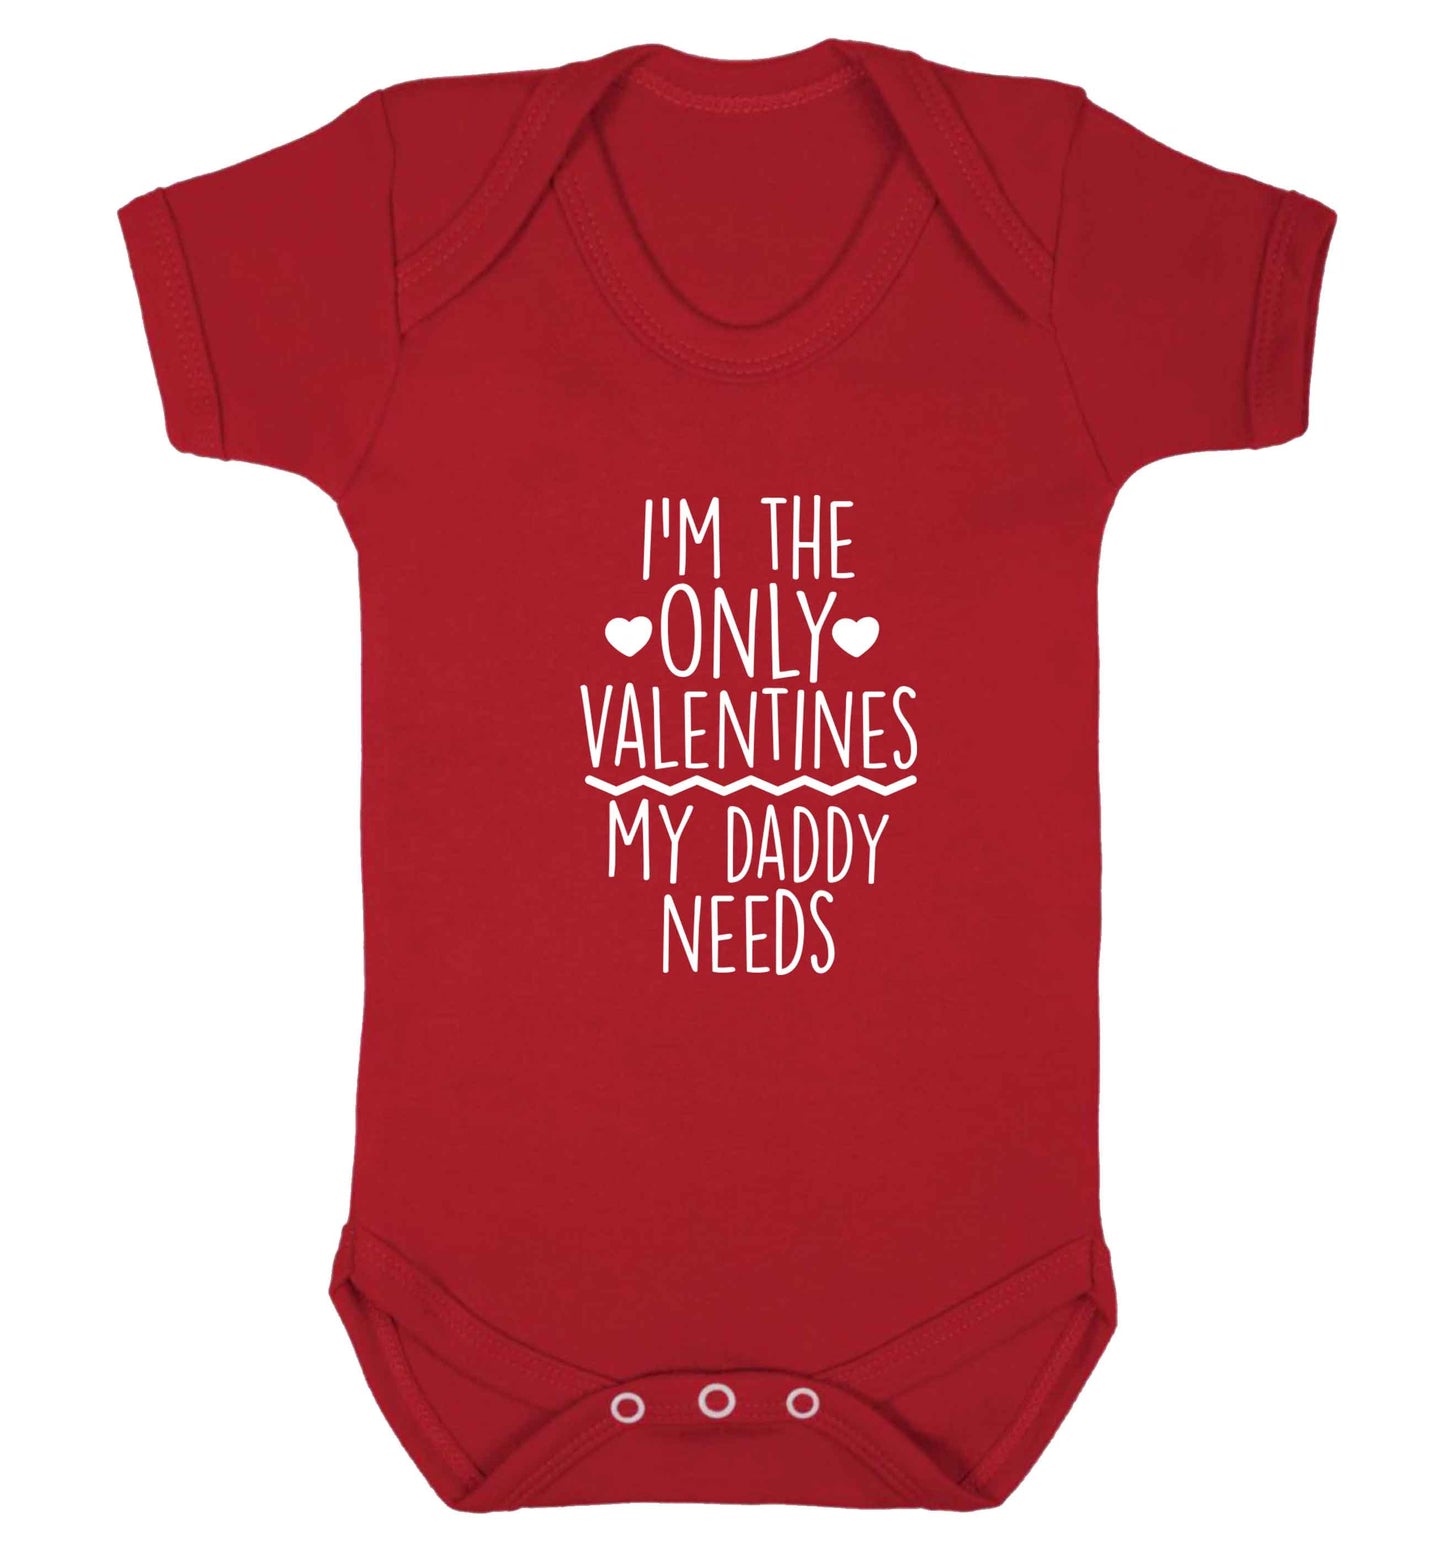 I'm the only valentines my daddy needs baby vest red 18-24 months